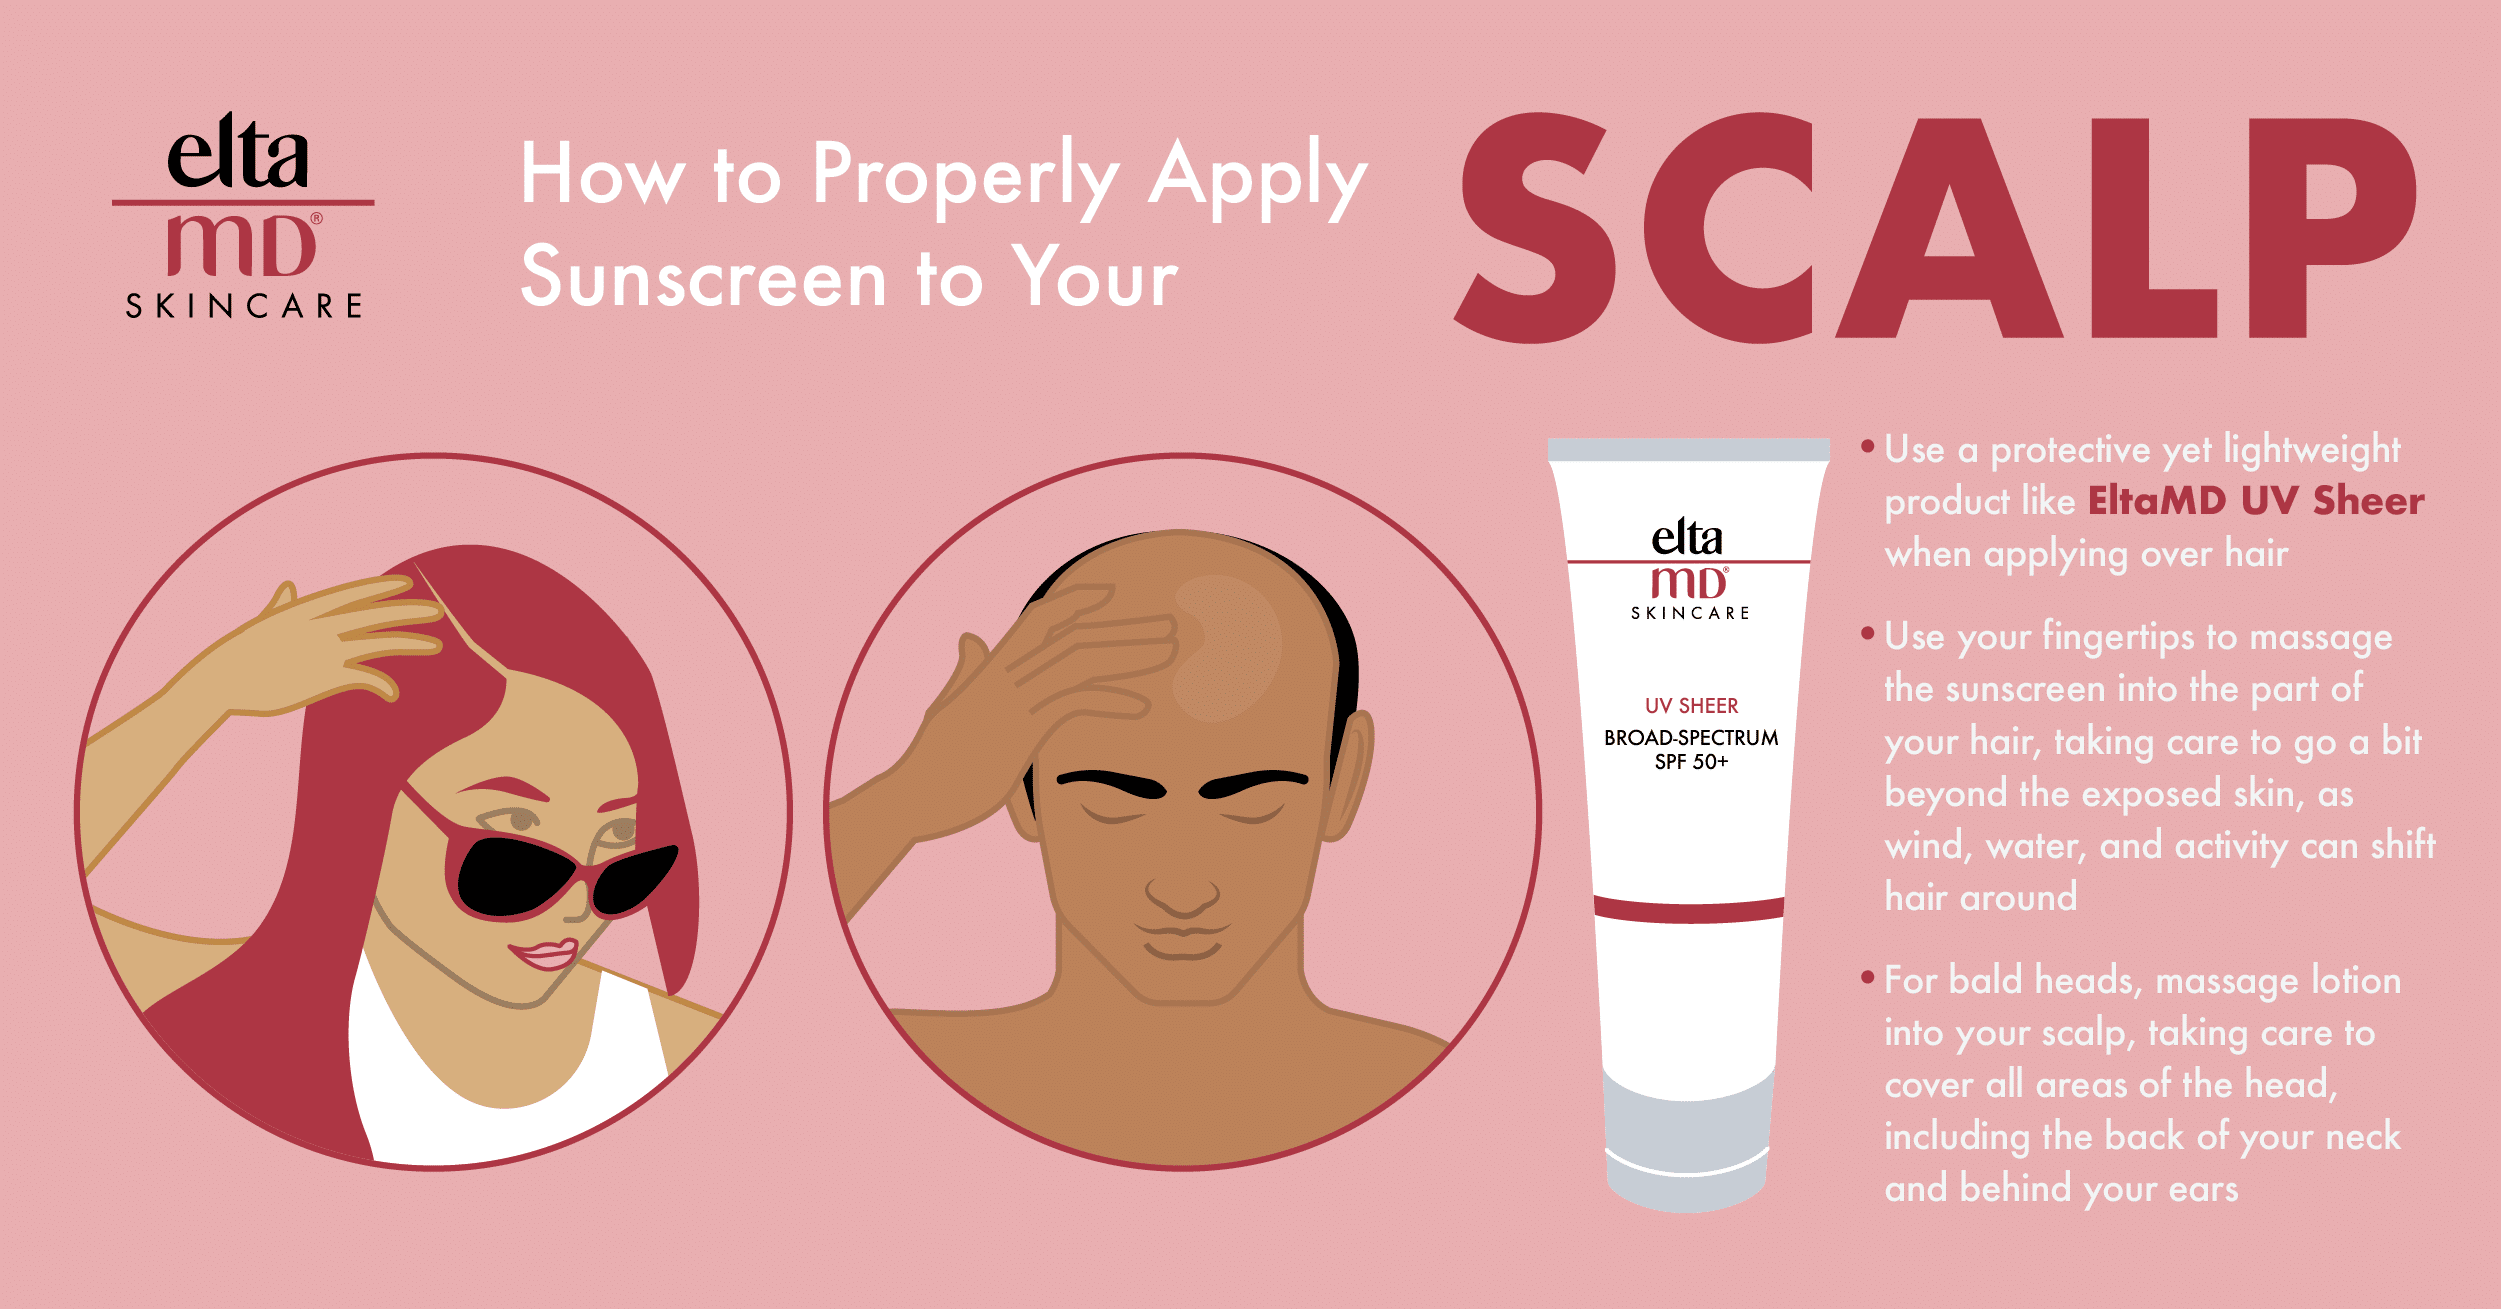 How to Properly Apply Sunscreen to Your Scalp